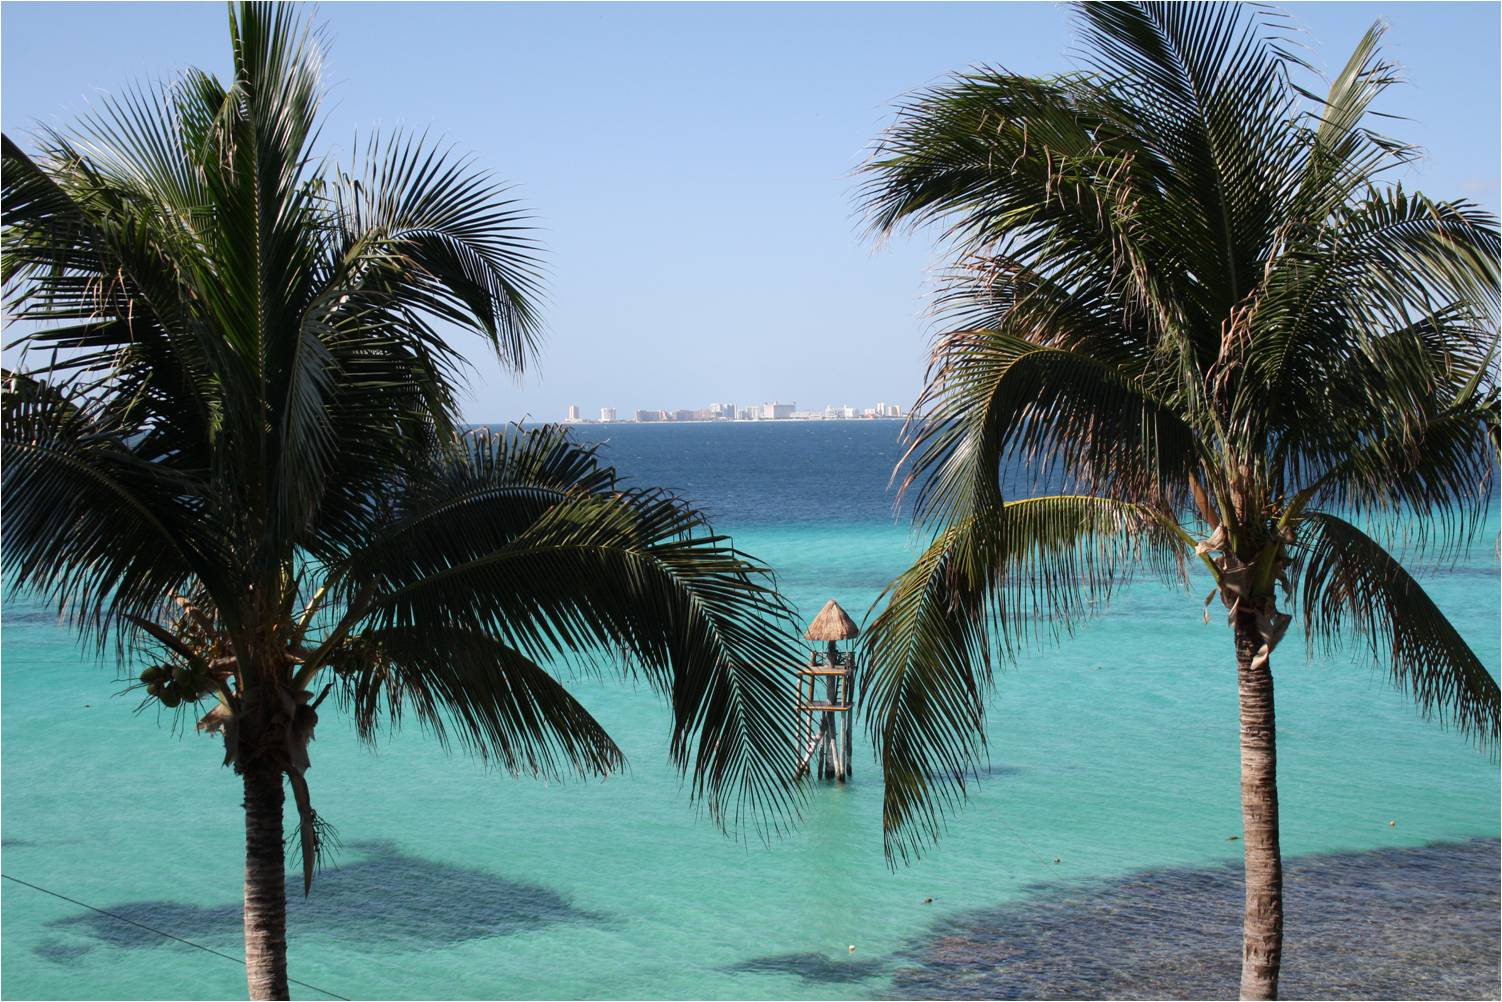 Cancún in the background seen from Isla Mujeres